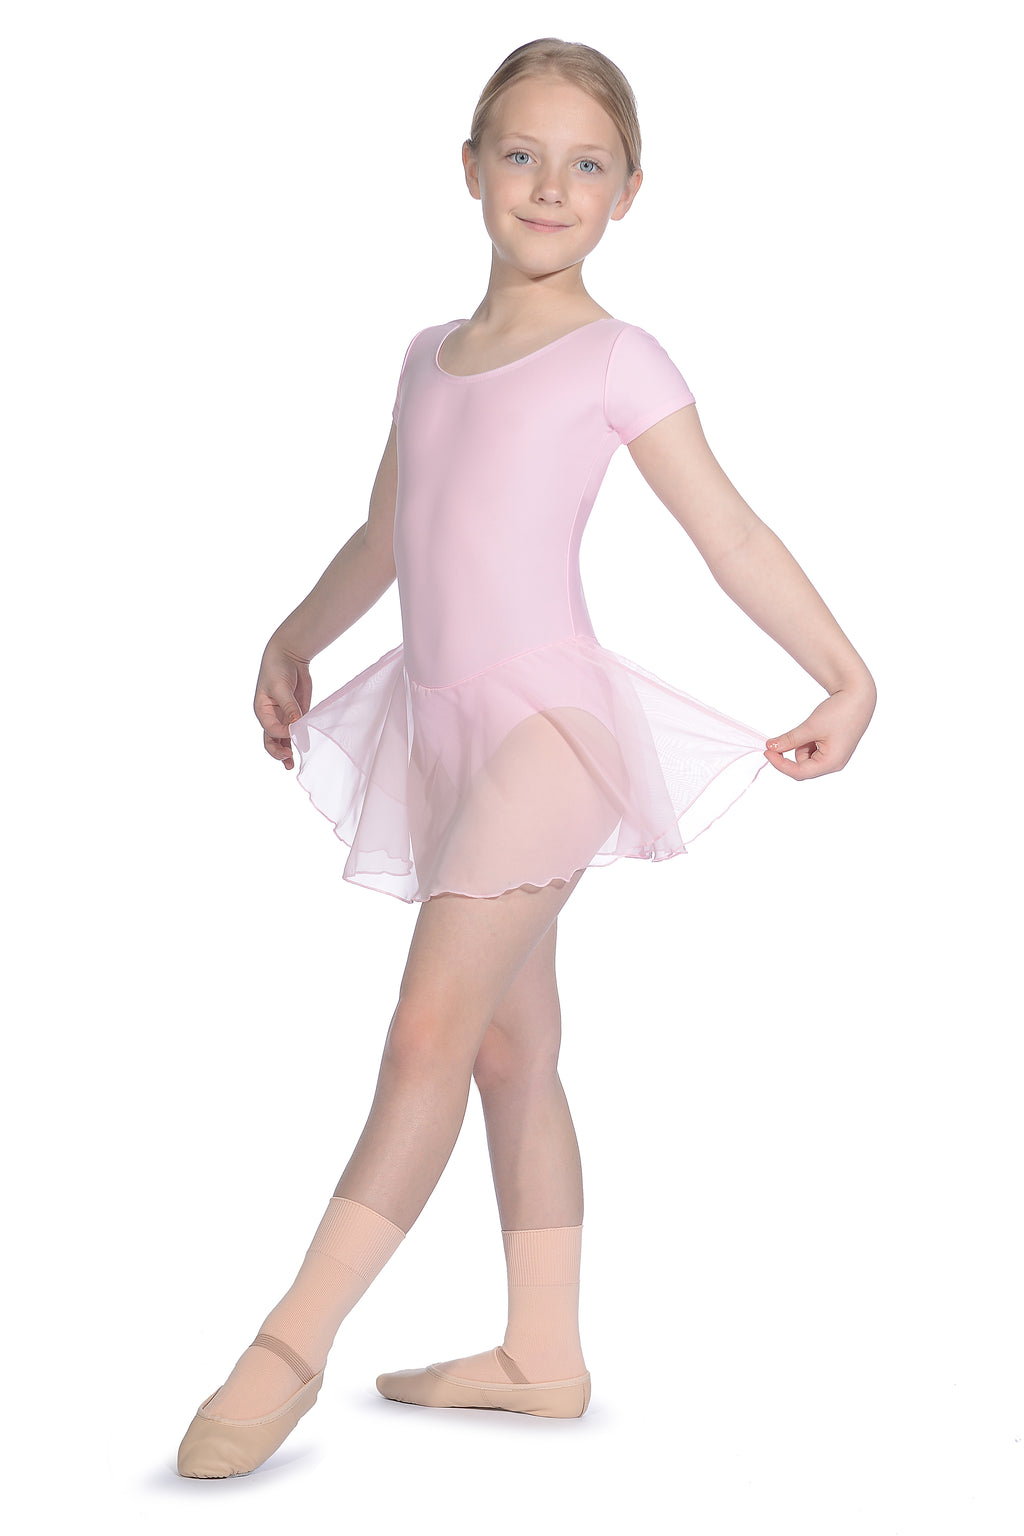 Roch Valley Leotard with attached skirt - pink - full length